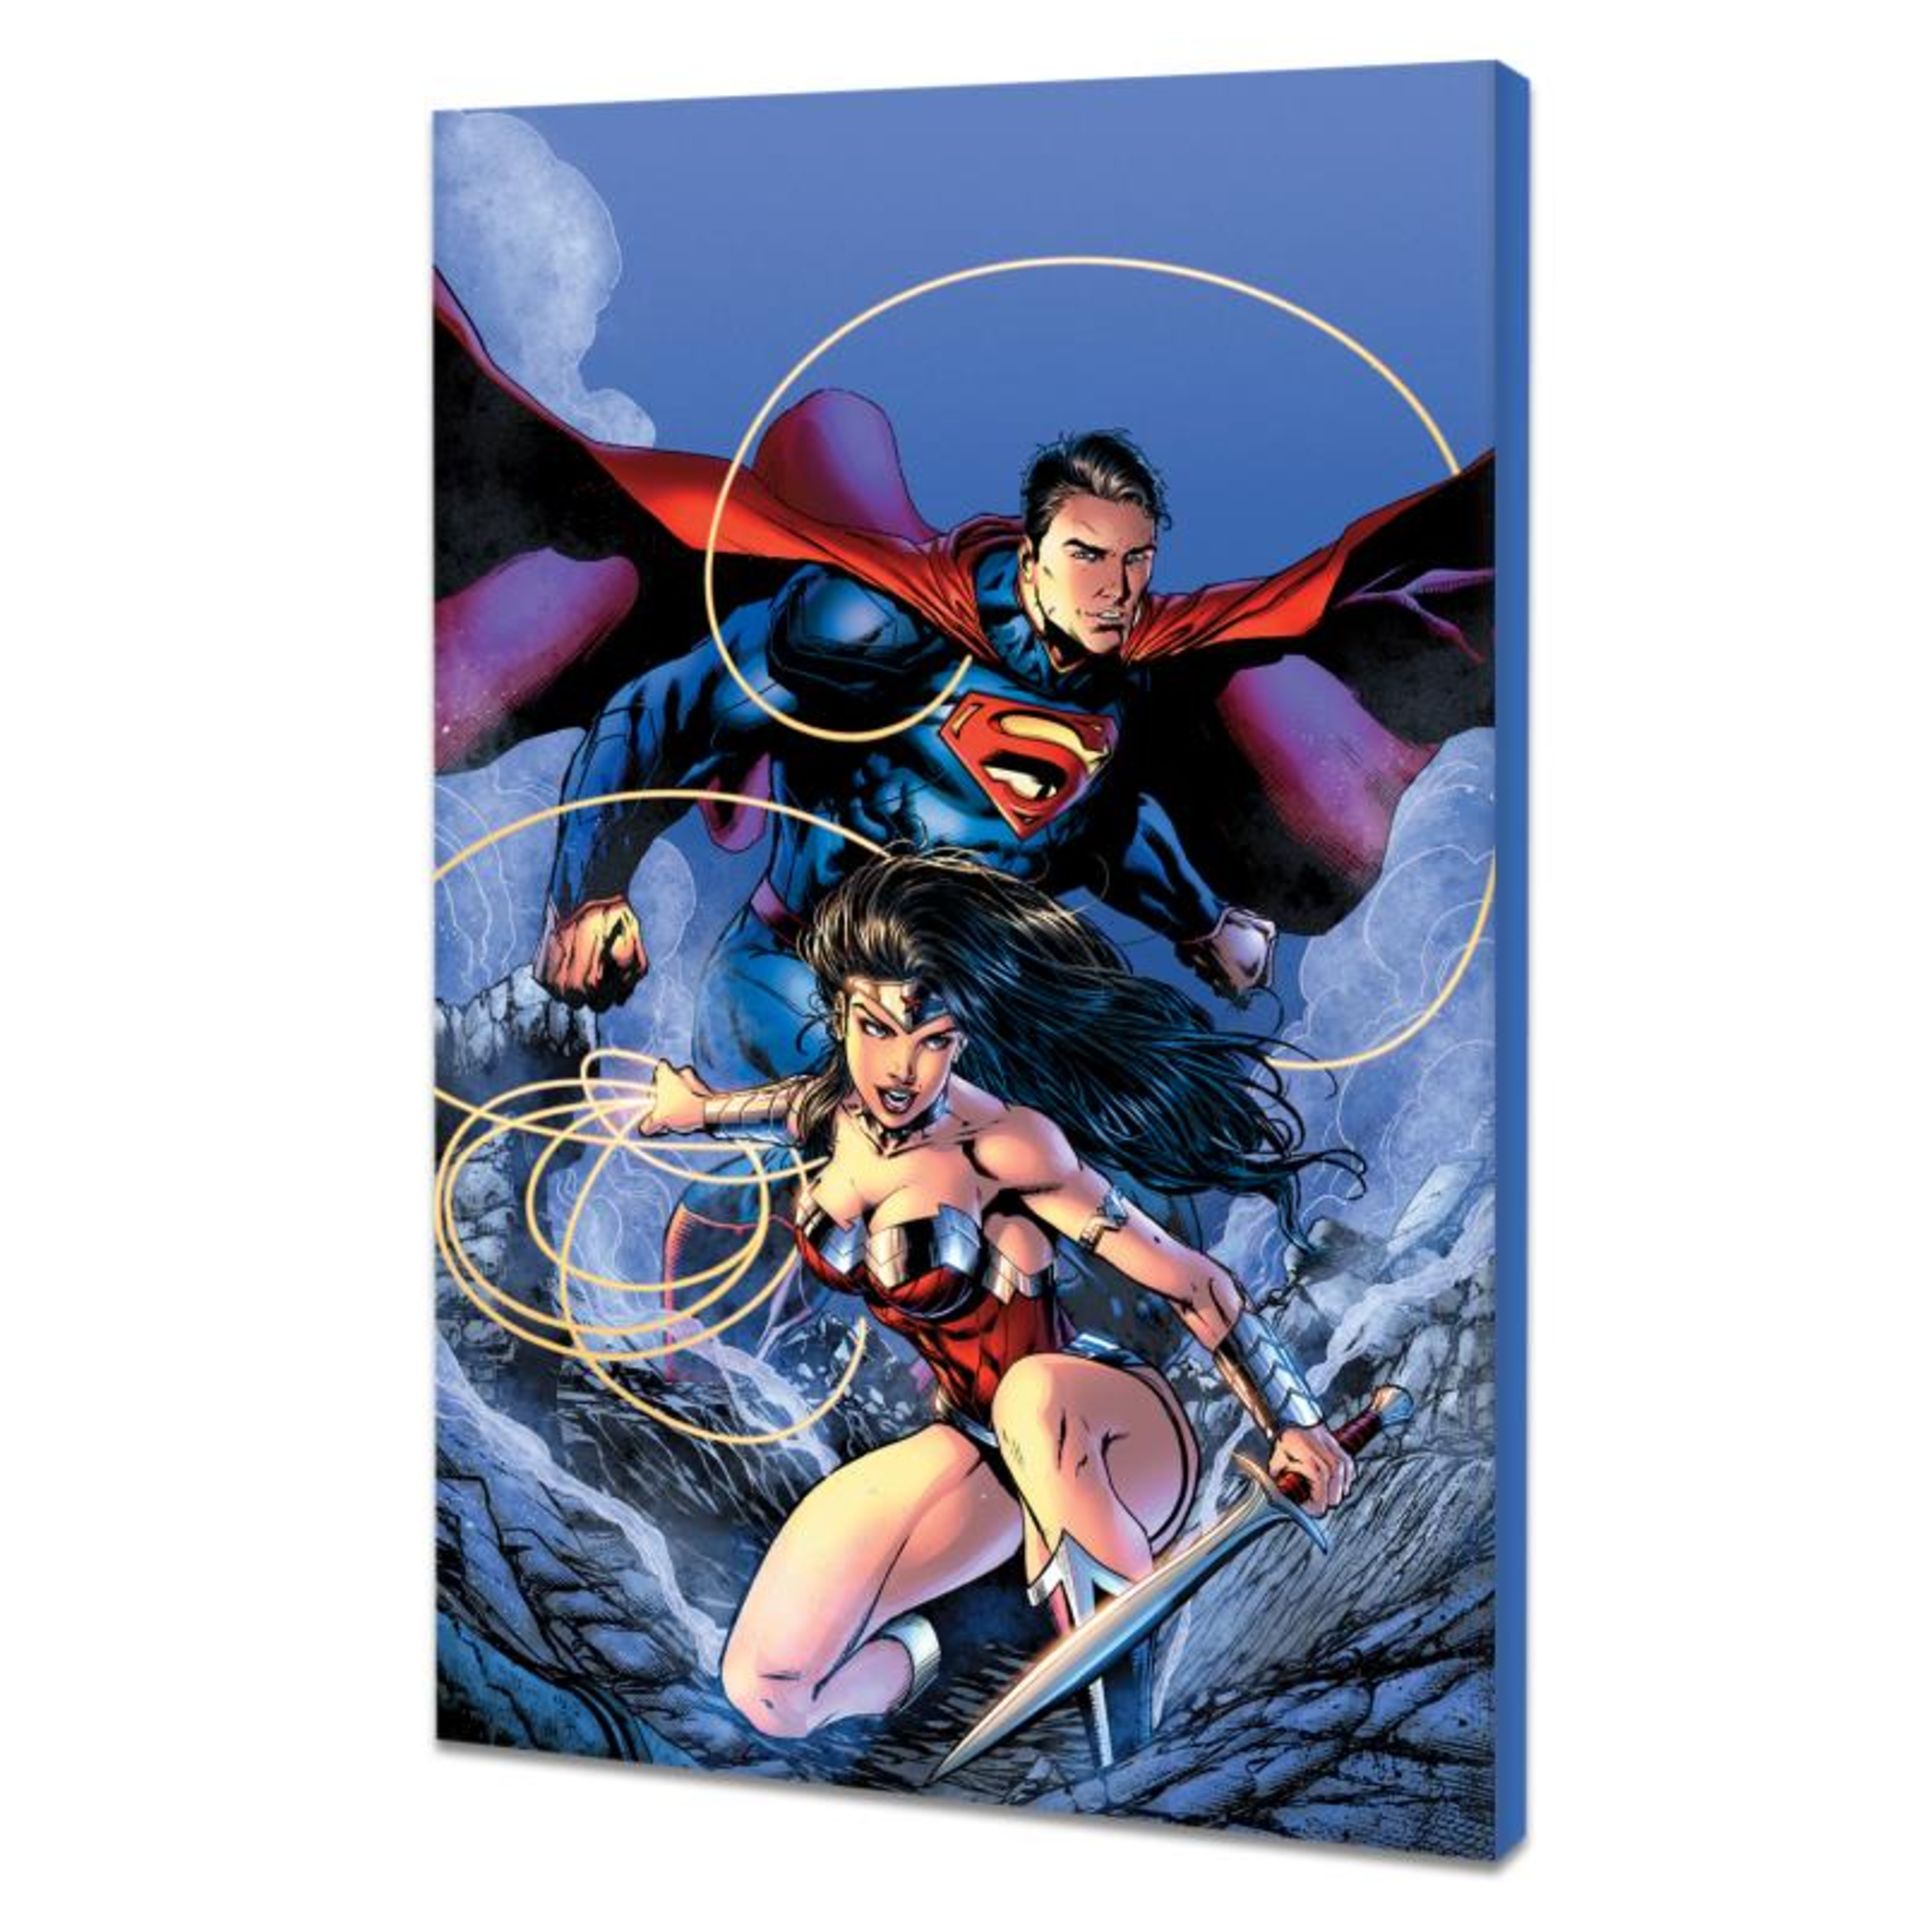 DC Comics, "Justice League (The New 52) #14" Numbered Limited Edition Giclee on - Image 8 of 8